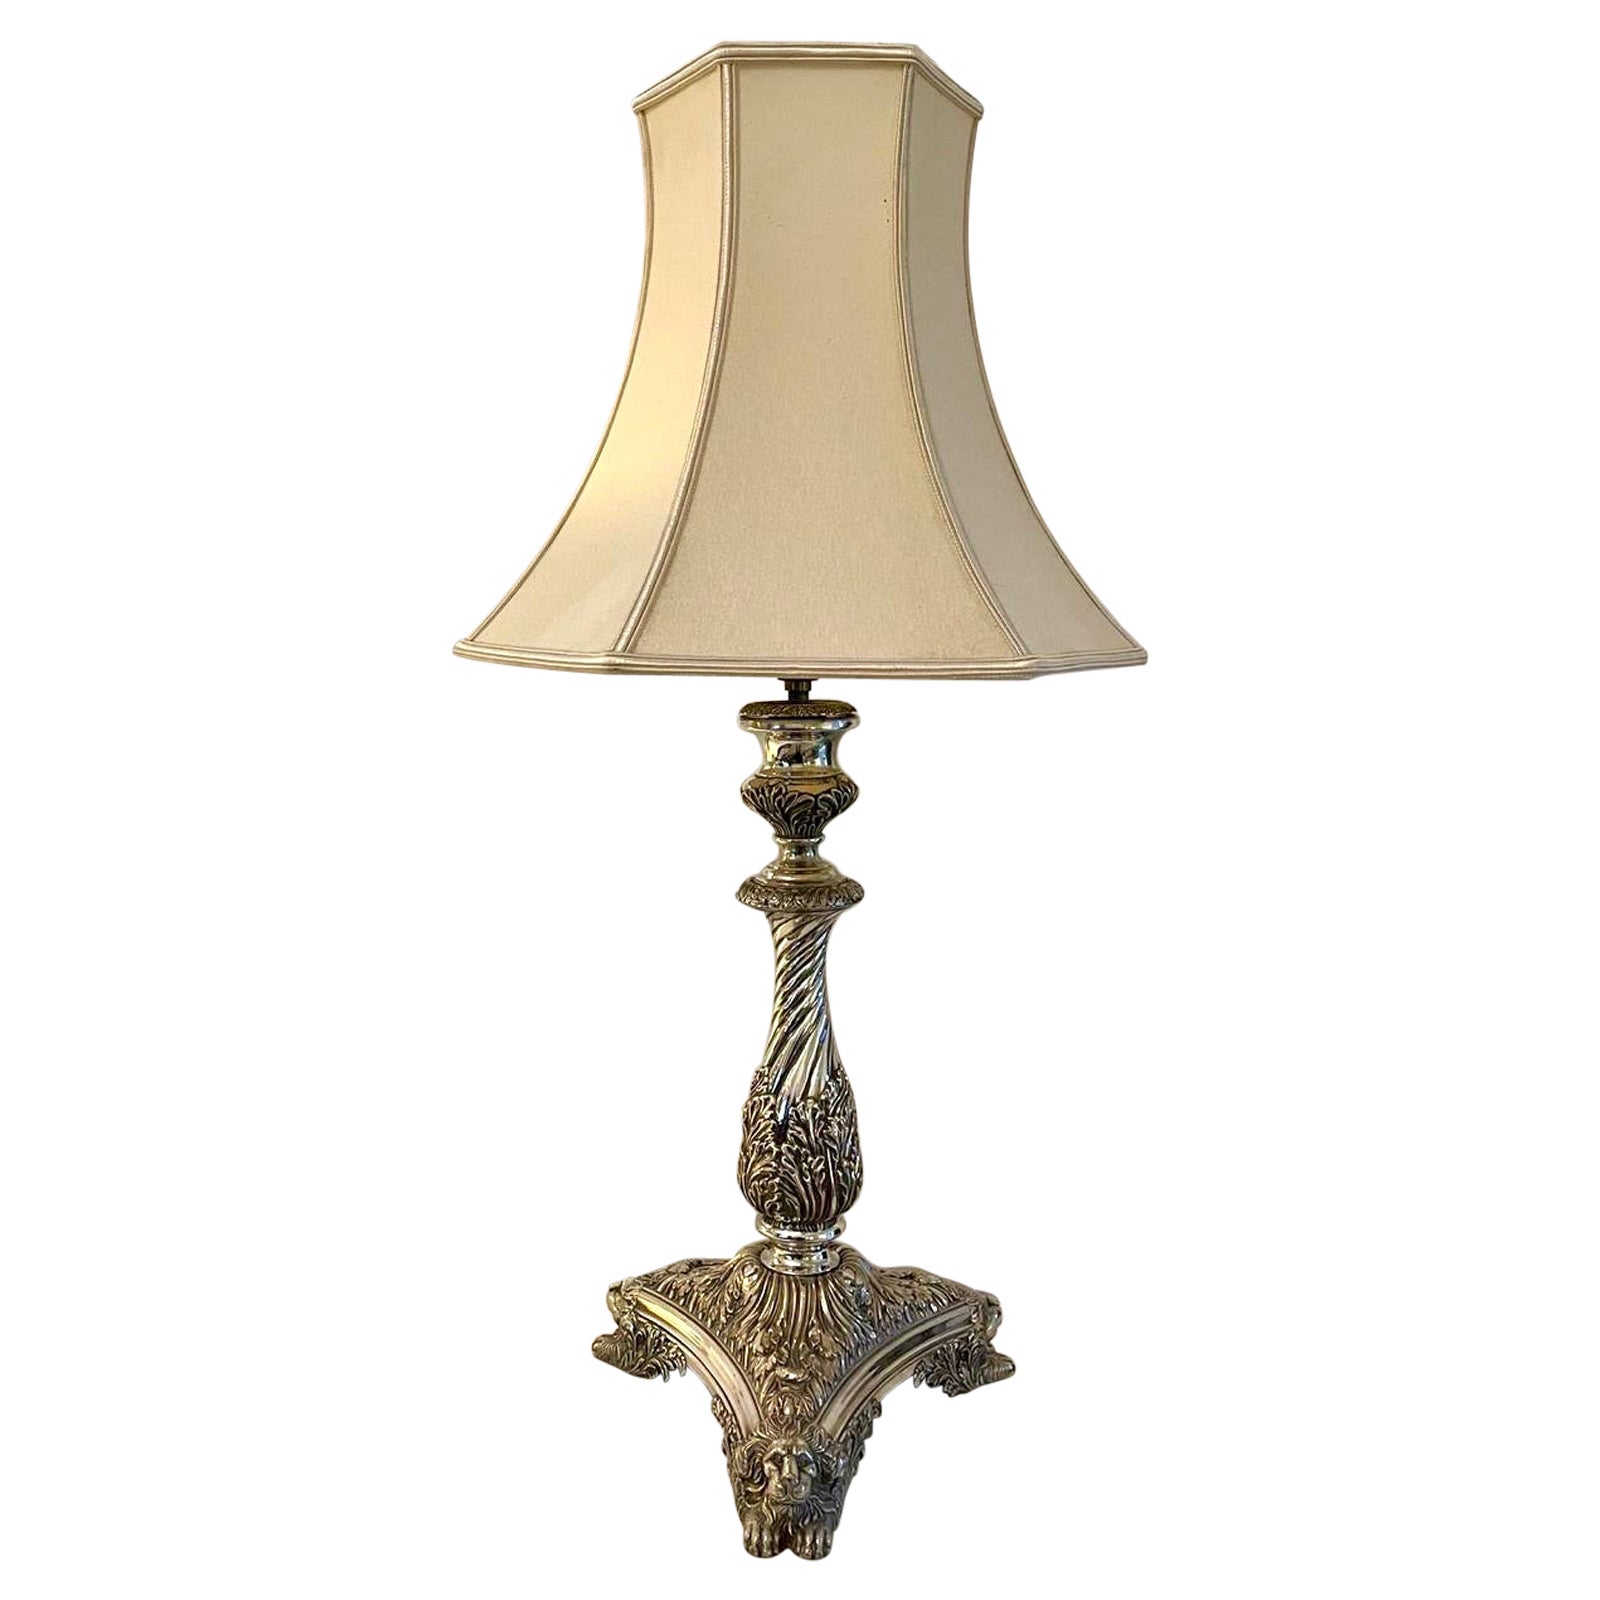 Outstanding Quality Antique Victorian Silver Plated Table Lamp